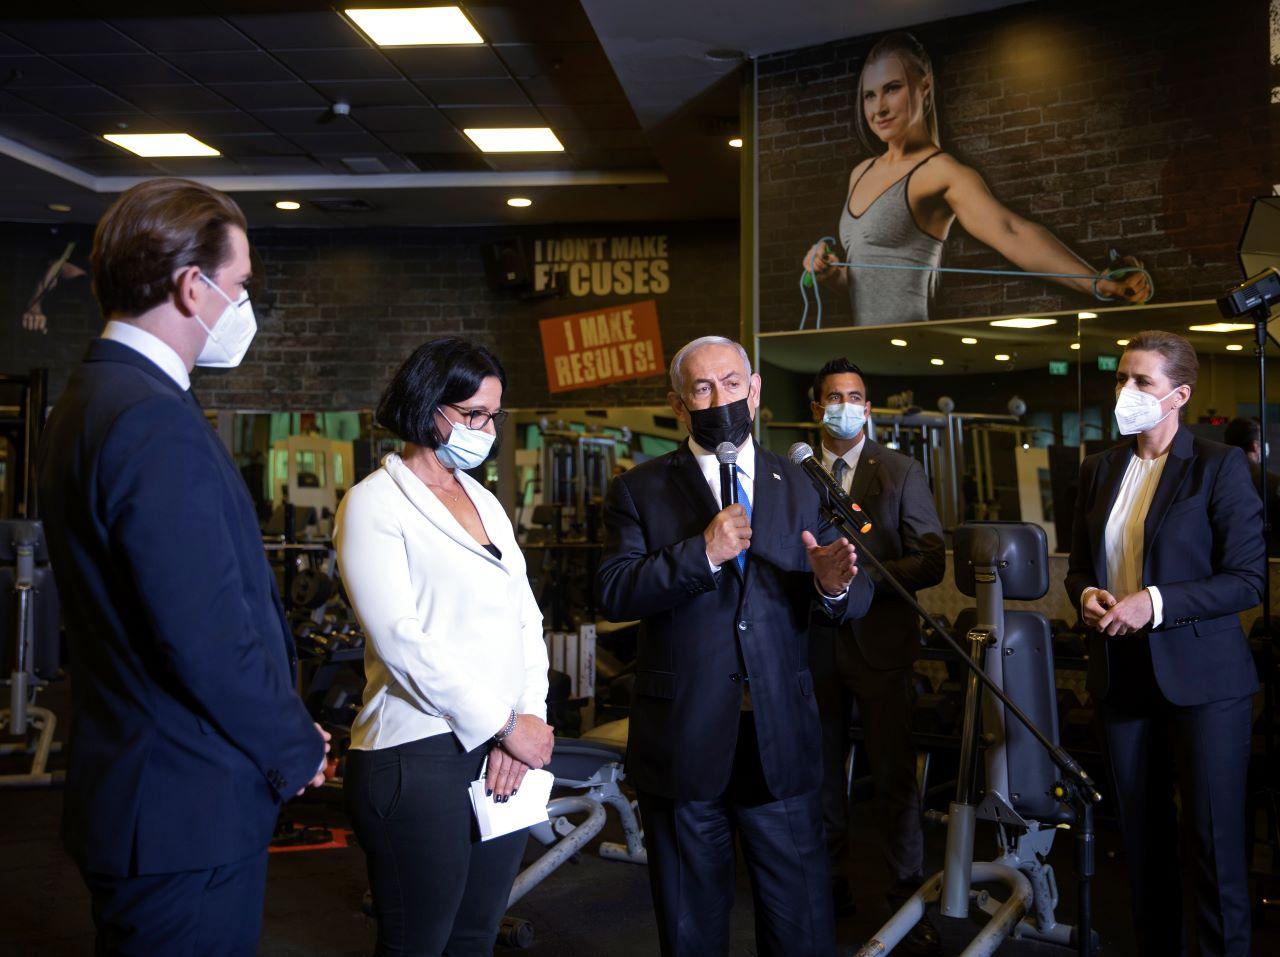 Israeli Prime Minister Benjamin Netanyahu (centre) visits a fitness gym with Austrian Chancellor Sebastian Kurz (left) and Danish Prime Minister Mette Frederiksen (right) to observe how the Green Pass for citizens vaccinated against Covid-19 is used, in Modi'in, Israel, March 4. Photo: AP